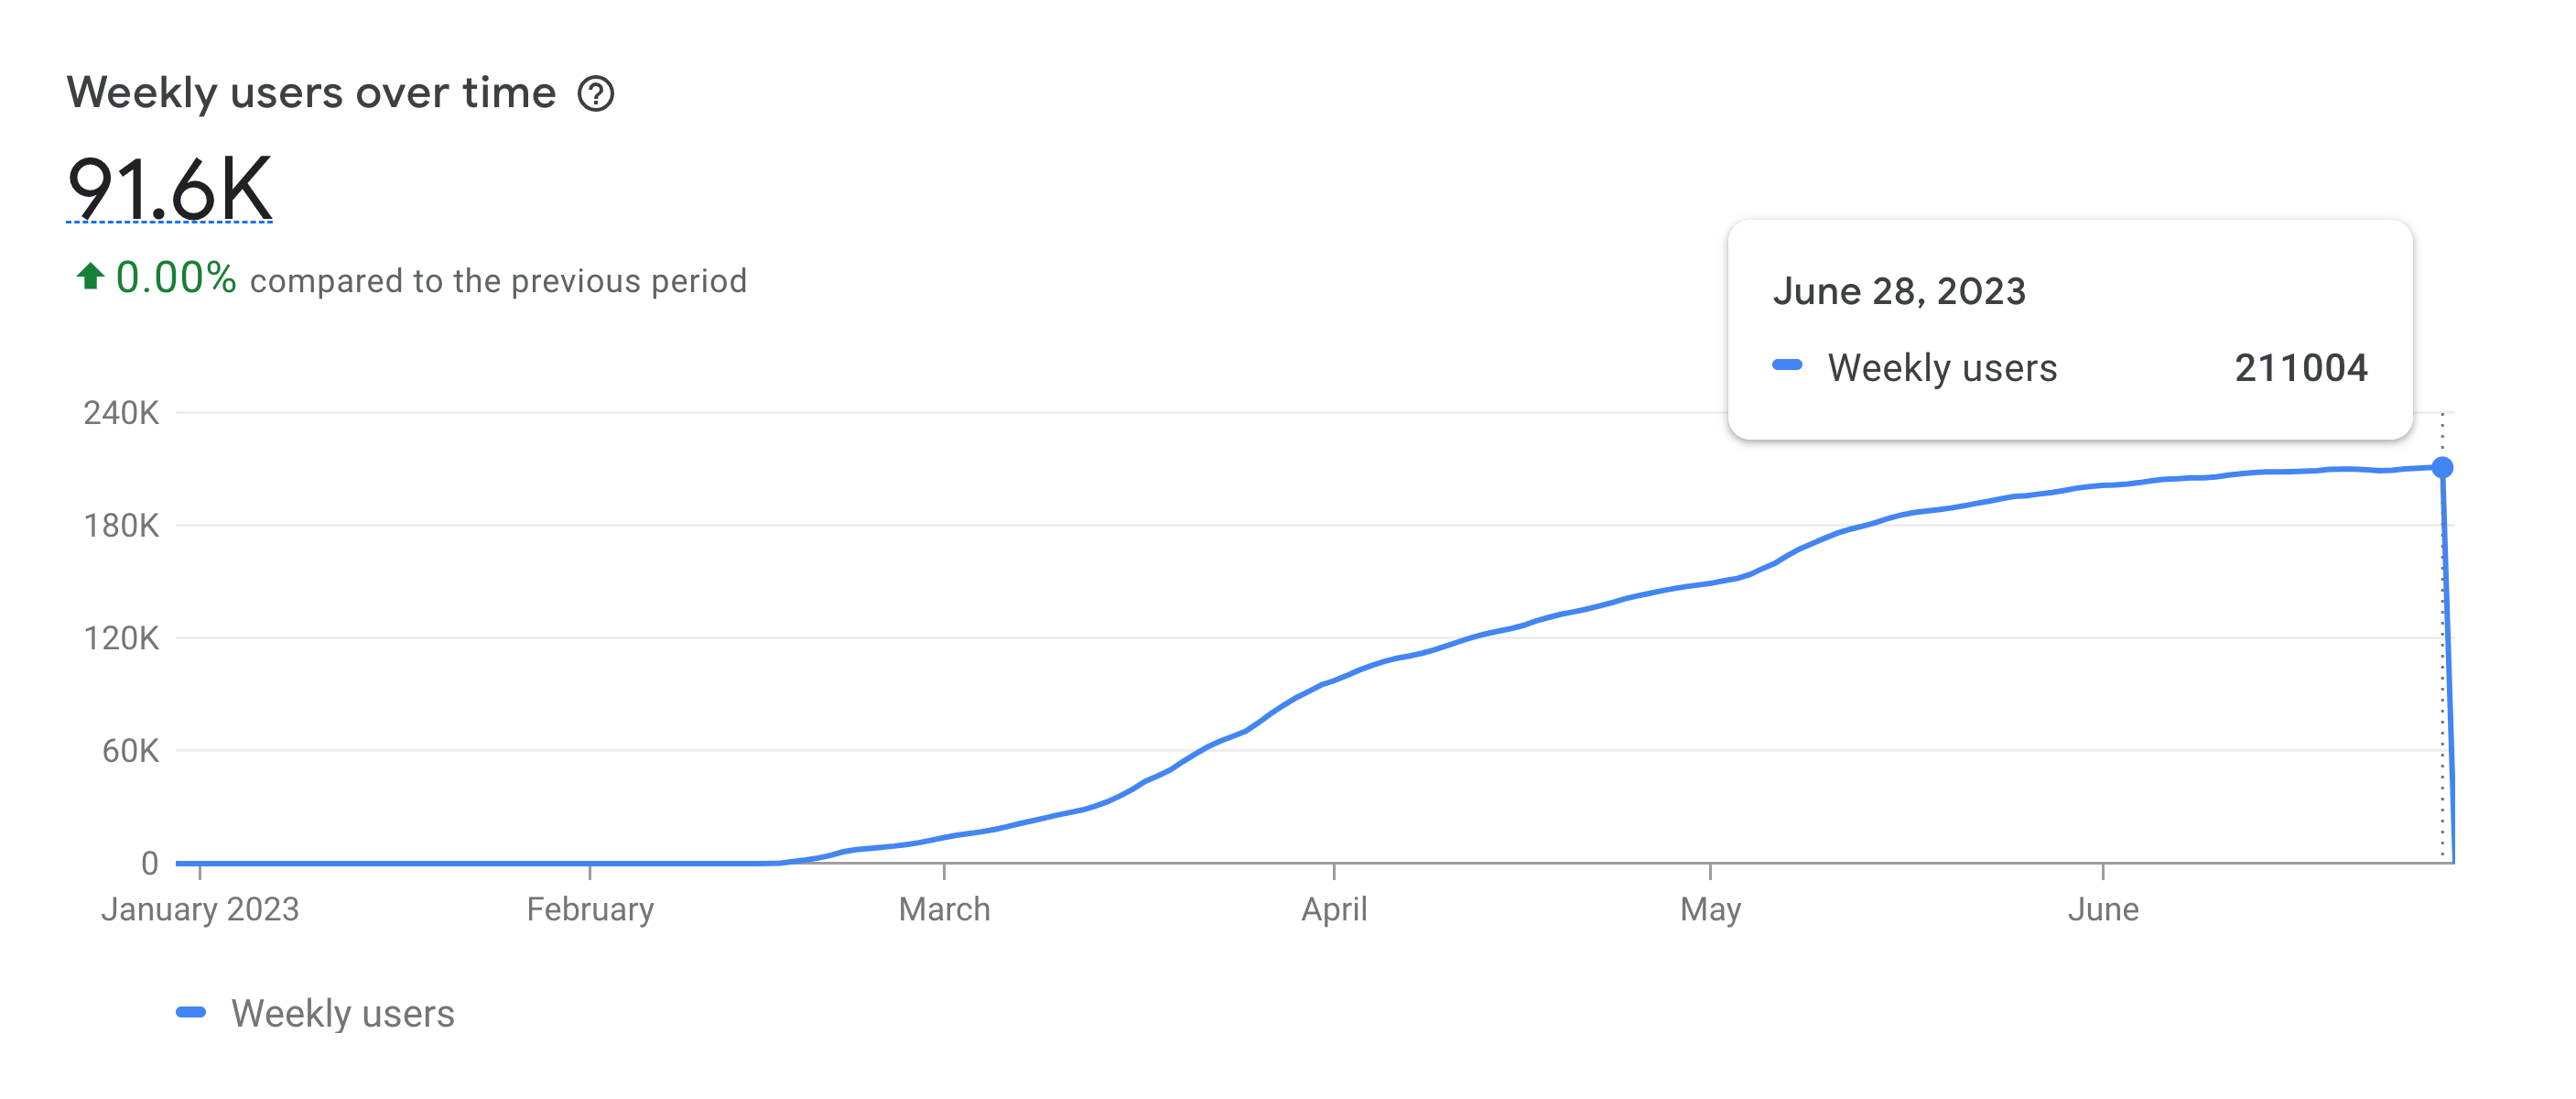 Weekly users over time